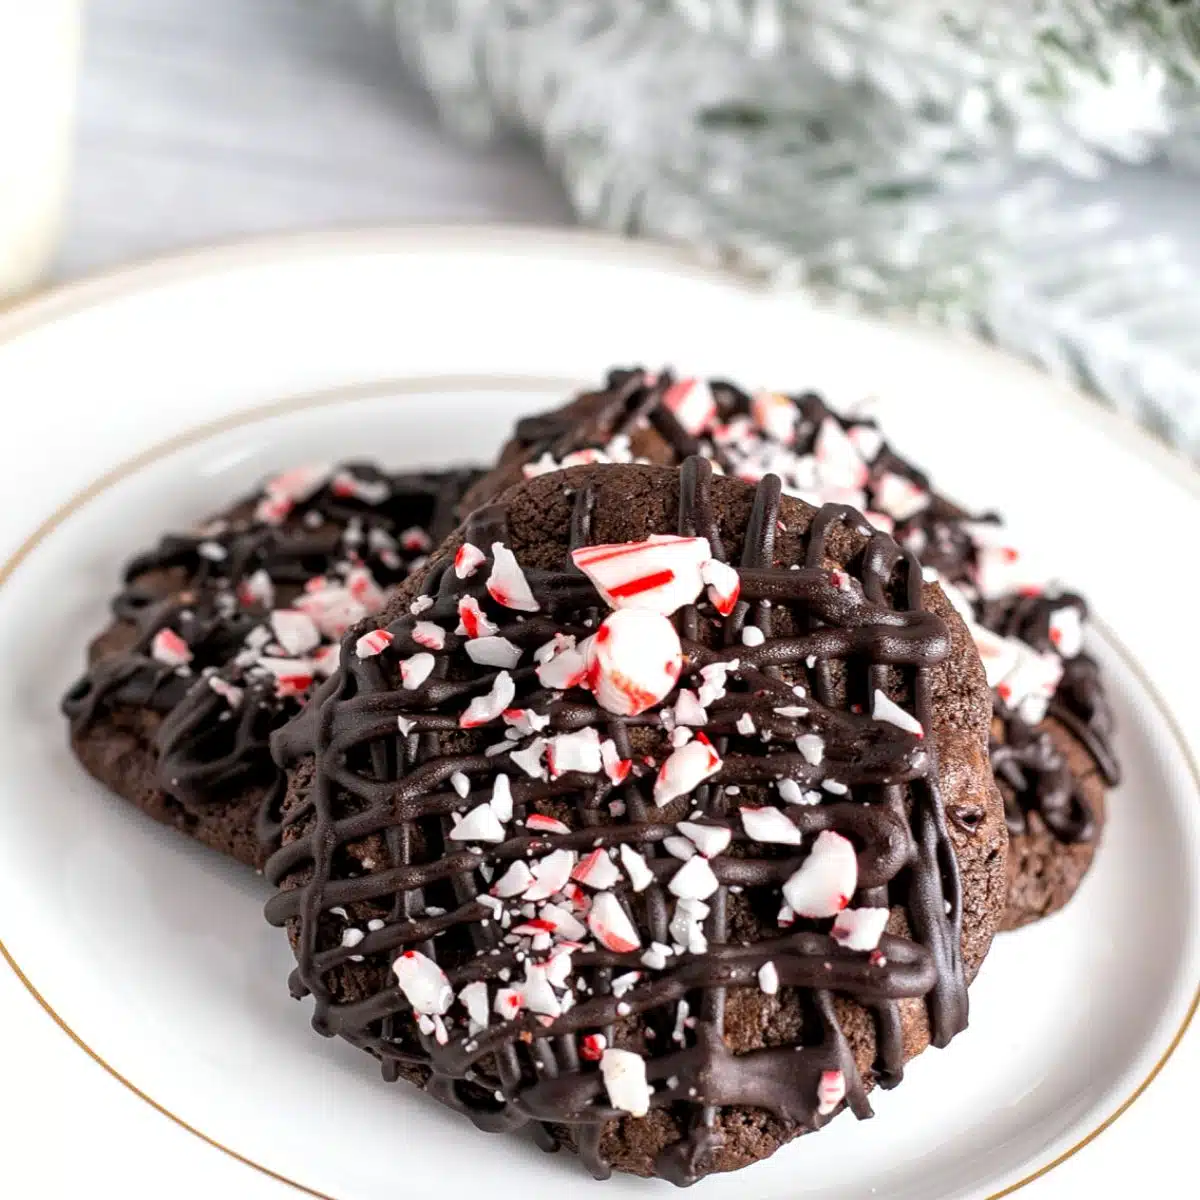 Delicious triple chocolate peppermint cookies on a white plate with festive greenery in the background and a glass of milk.